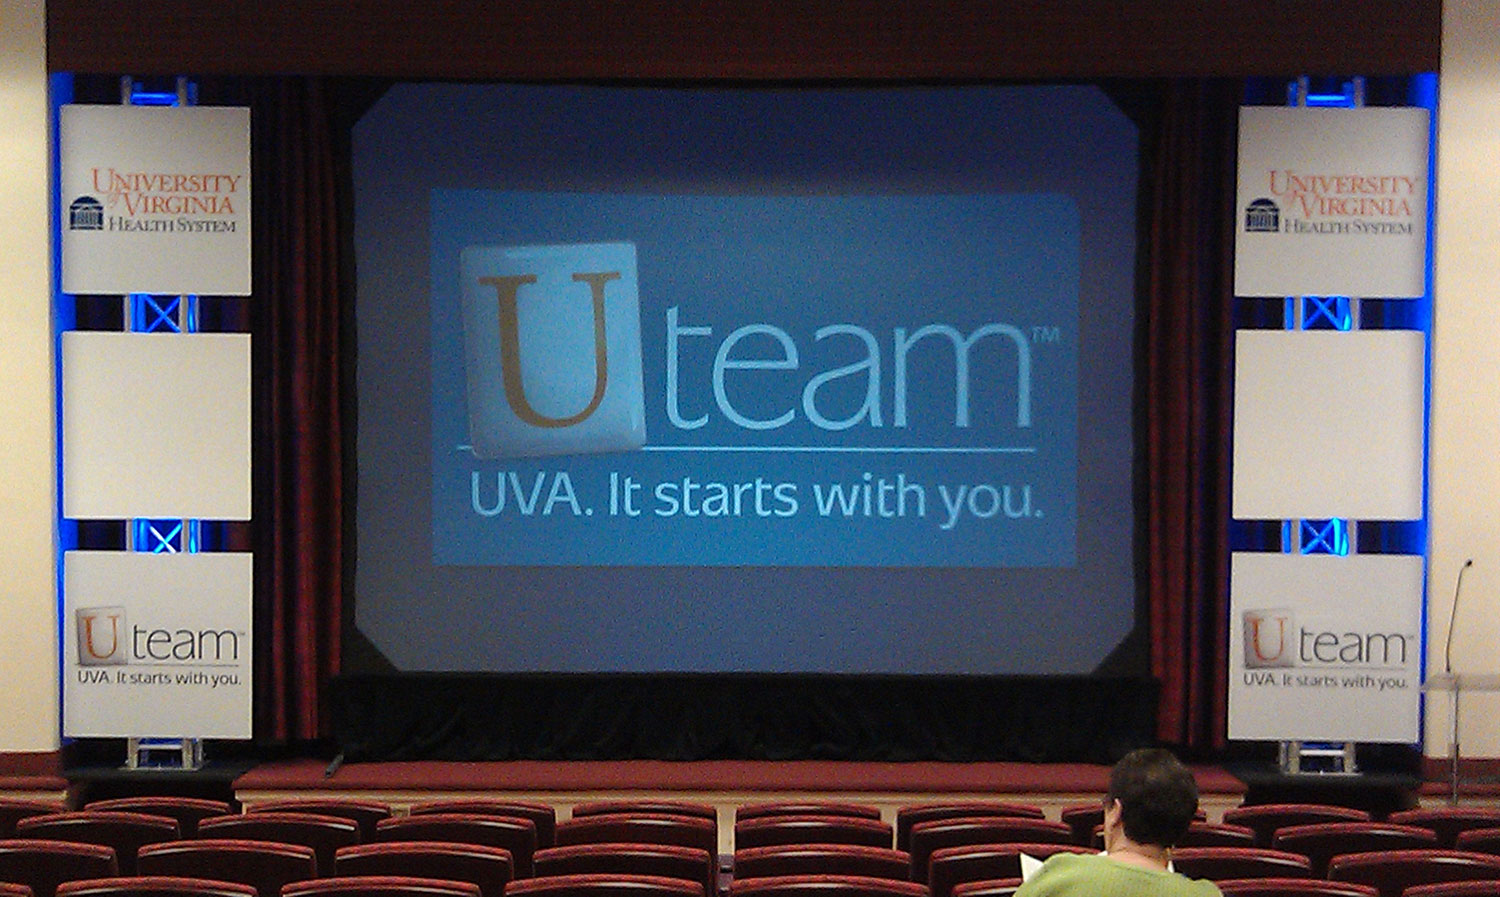 meeting-conference-event-decor-projection-charlottesville.jpg